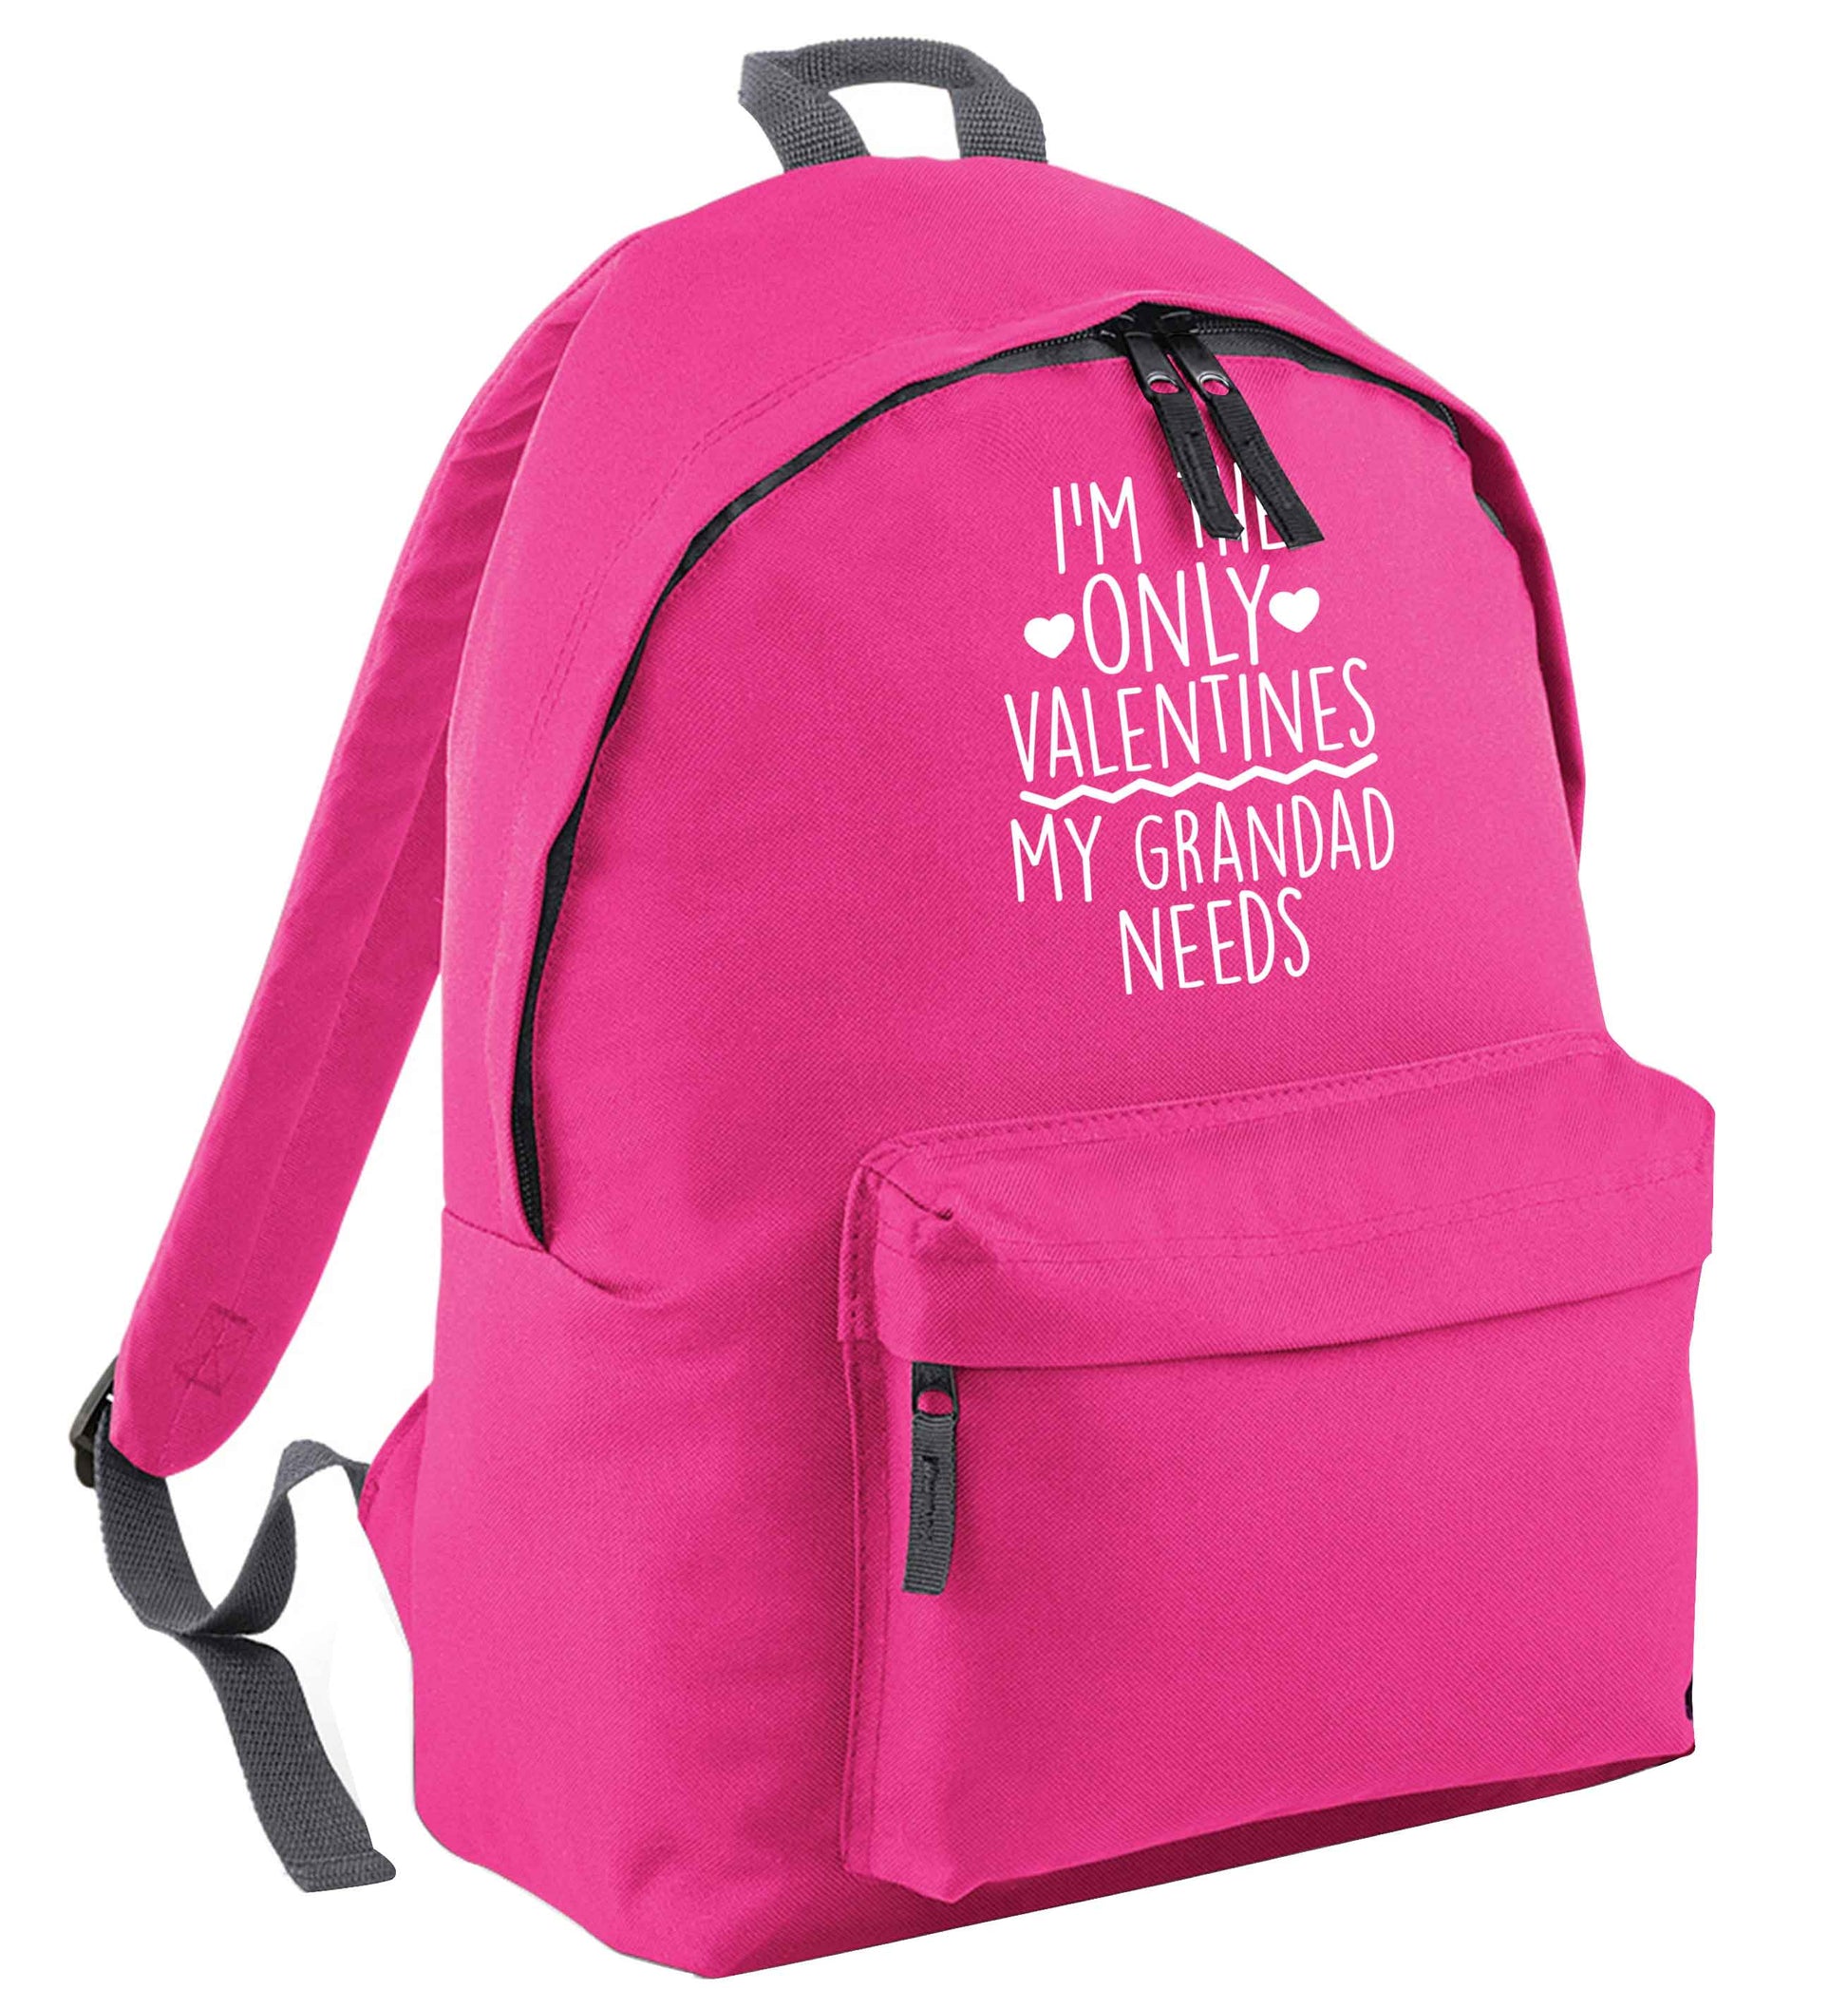 I'm the only valentines my grandad needs pink adults backpack